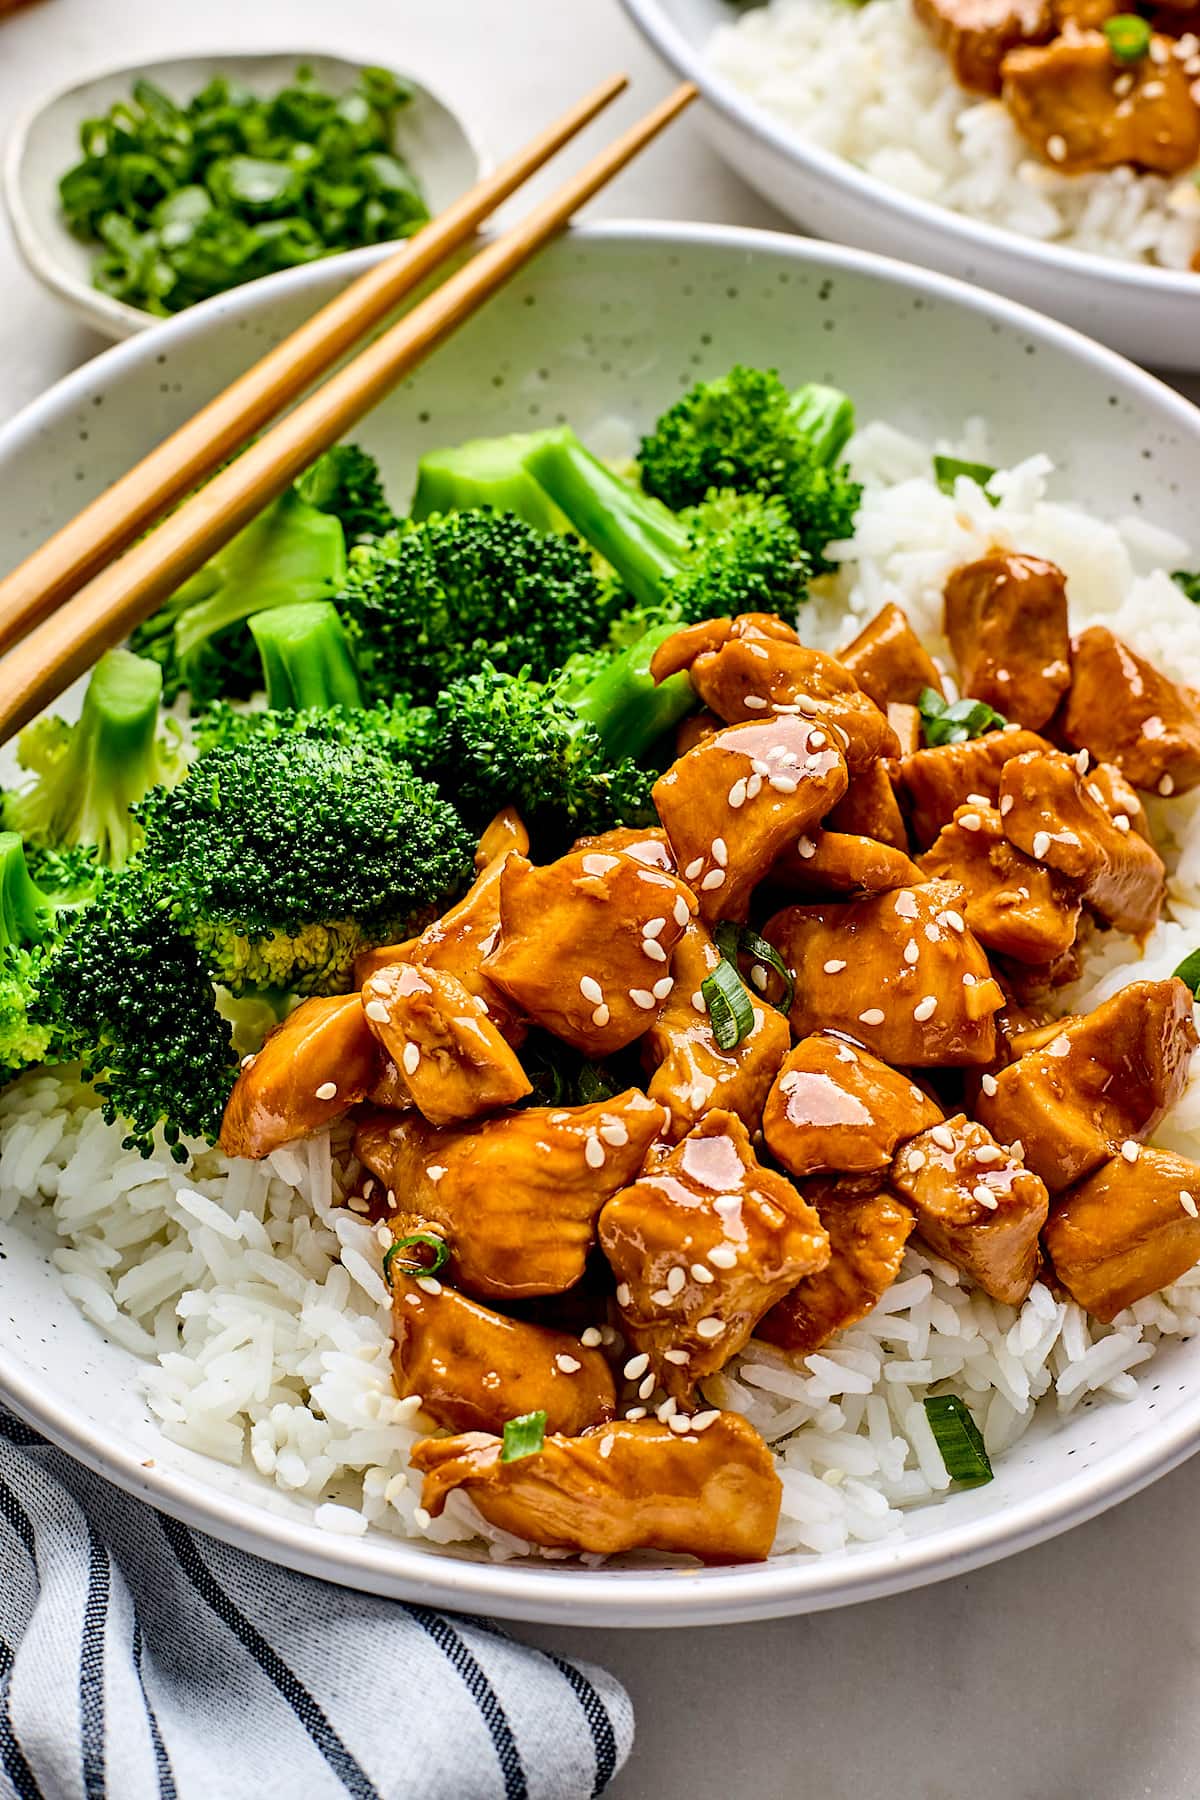 teriyaki chicken with broccoli and rice in a bowl with chopsticks.